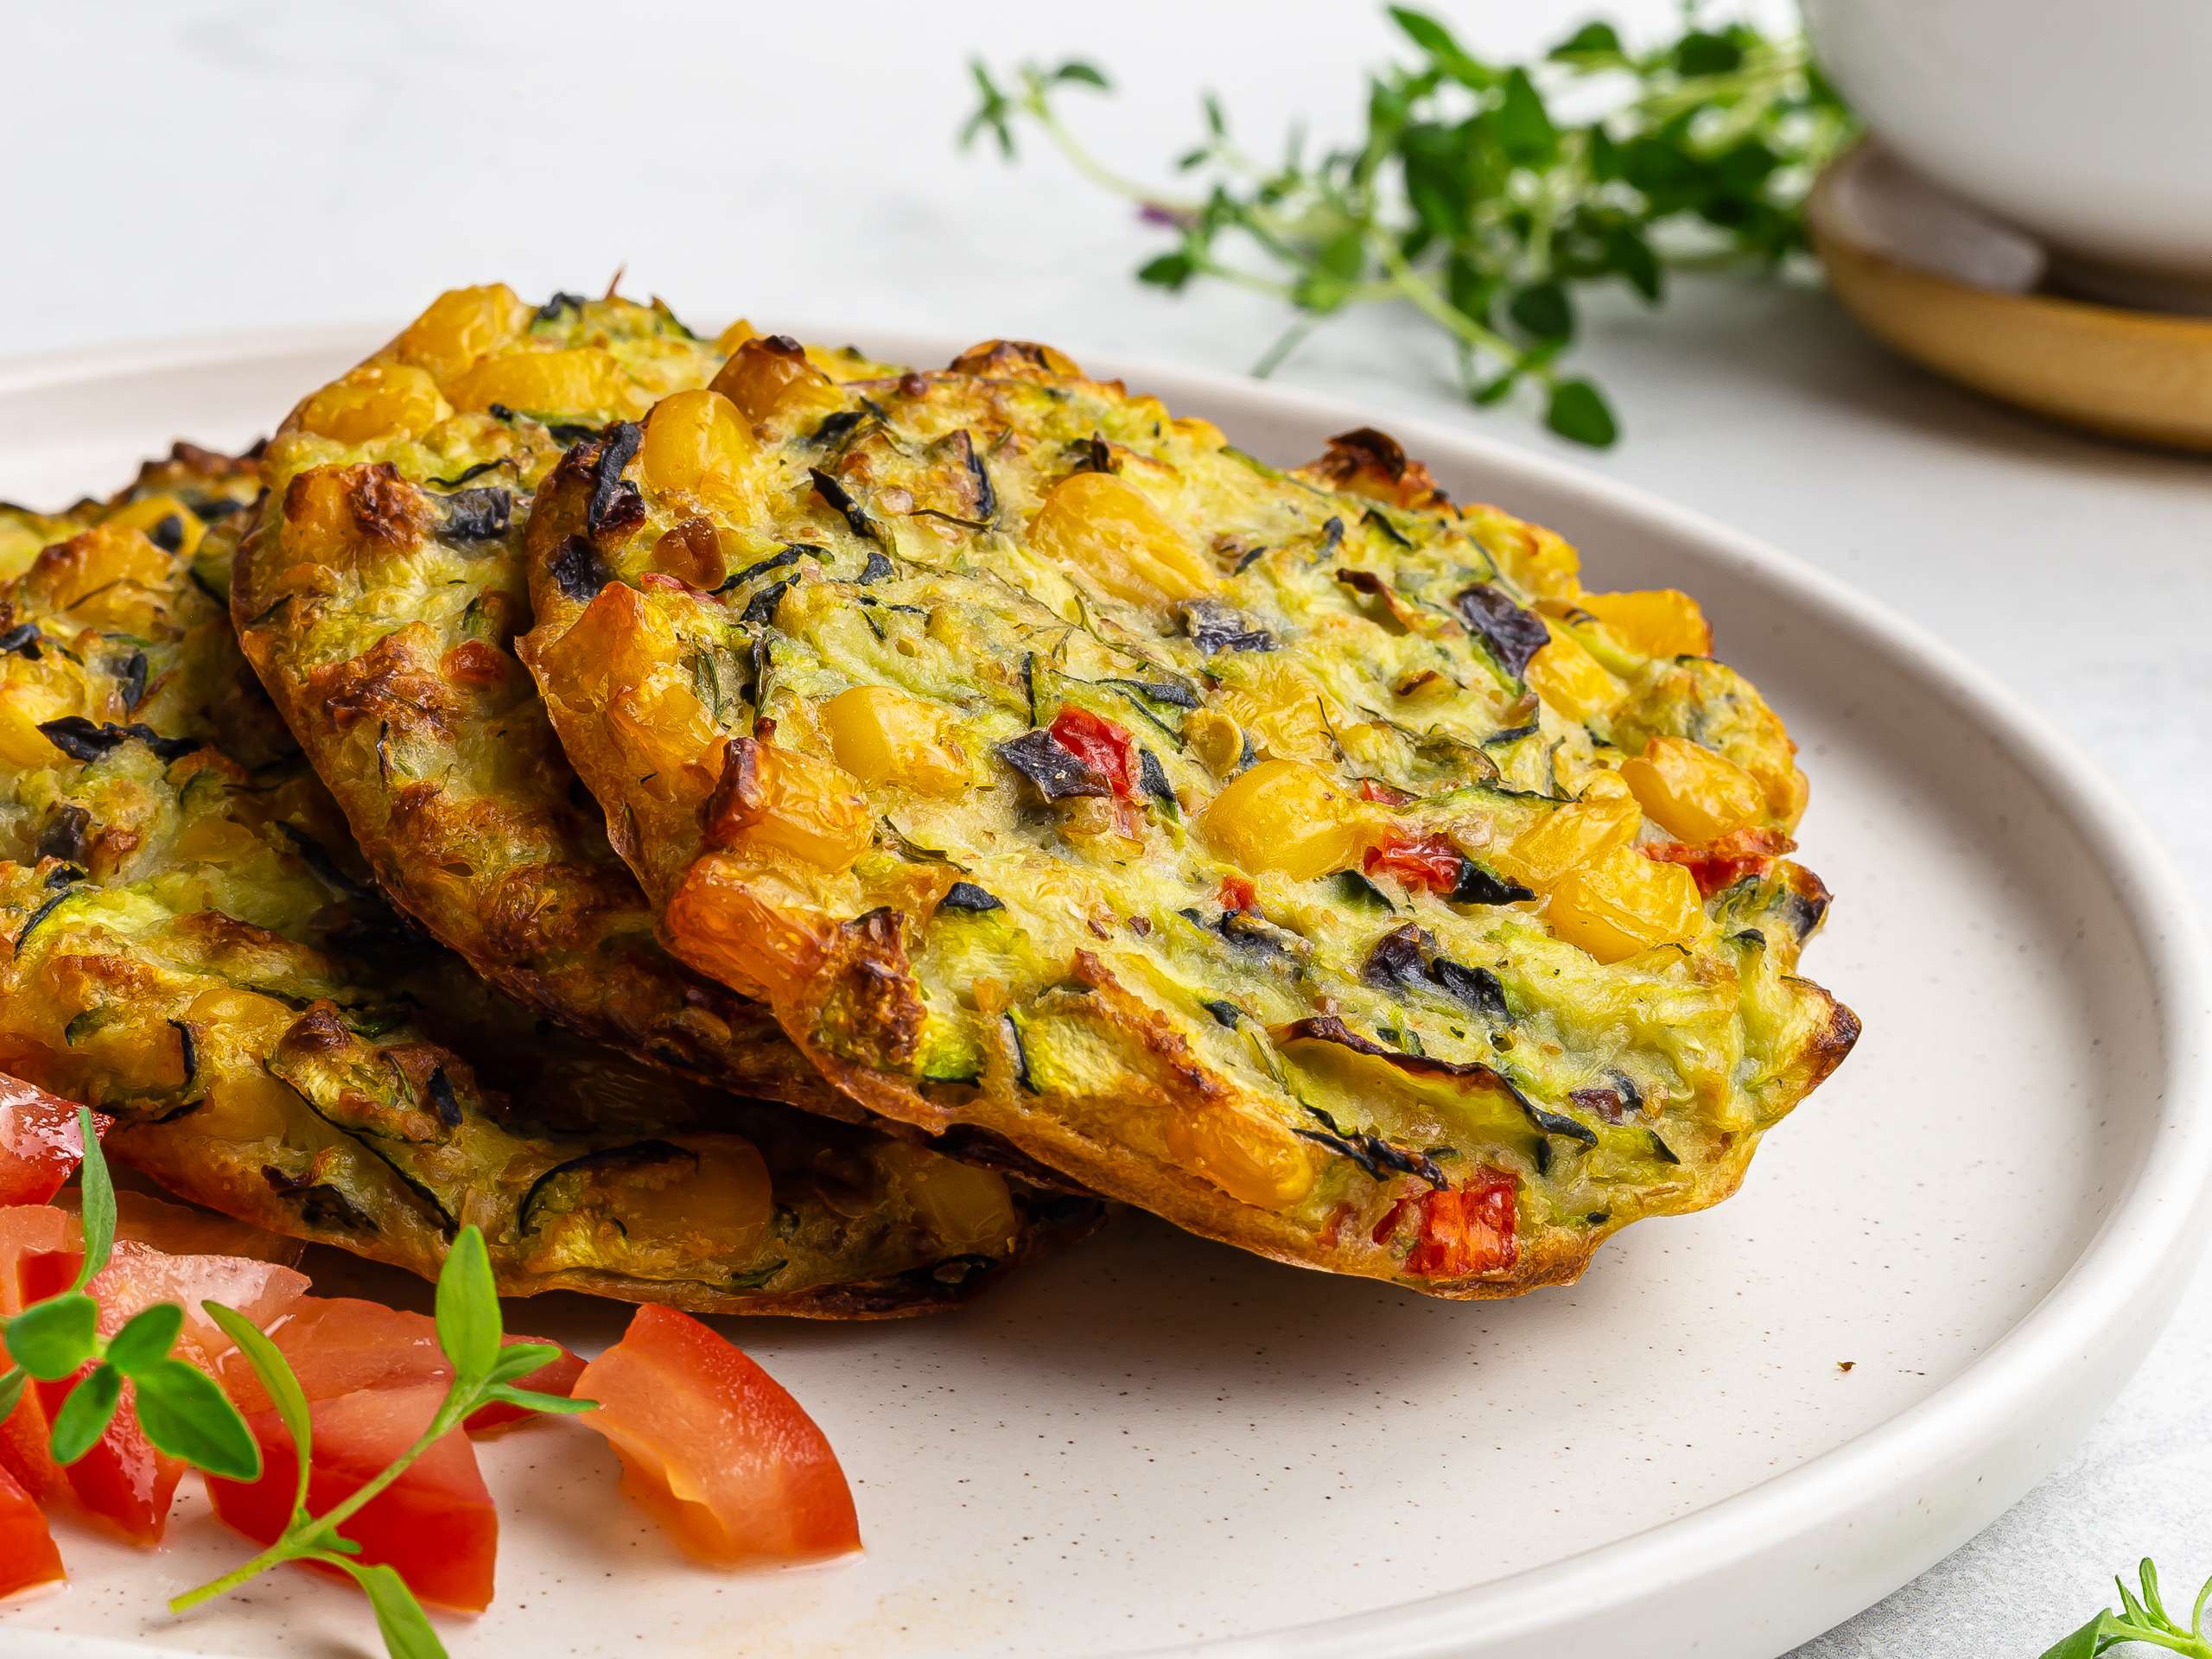 Courgette and Sweetcorn Fritters (Vegan, Oven-Baked)